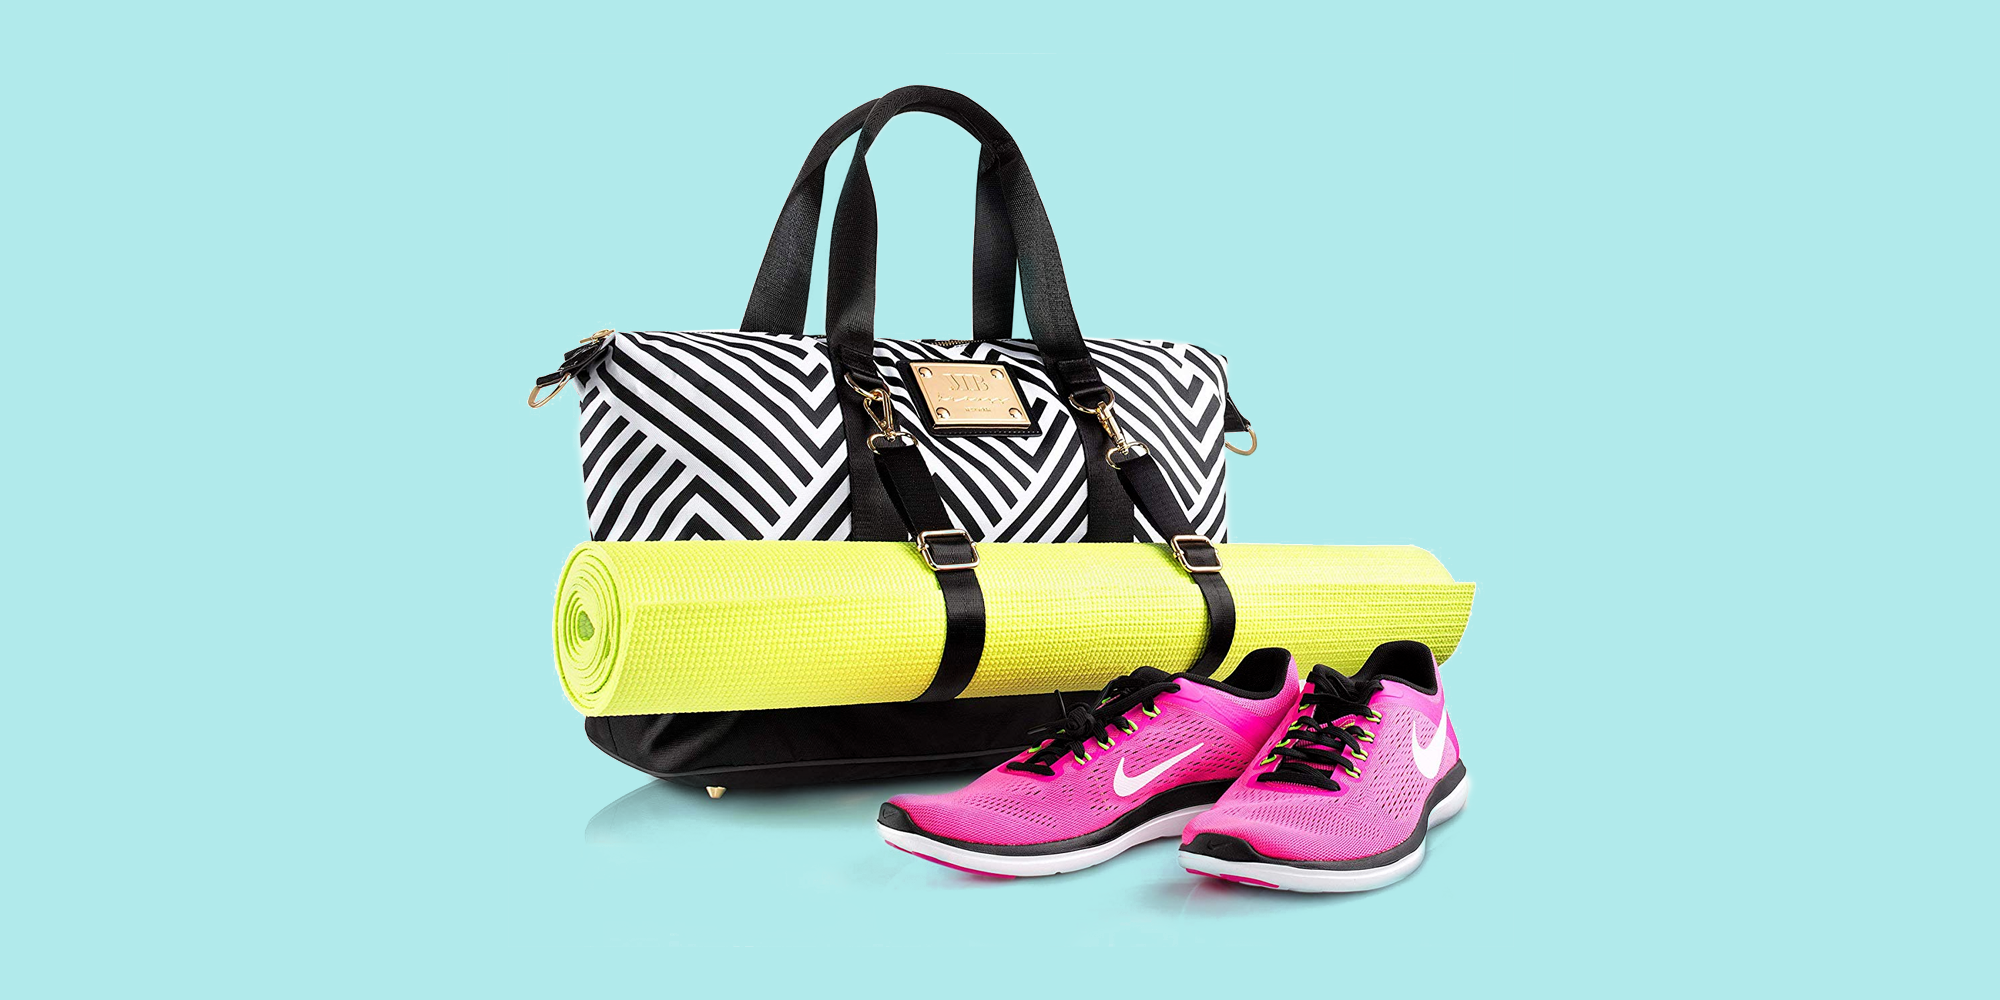 2-in-1 Yoga Mat Carrier & Tote Bag, Exercise